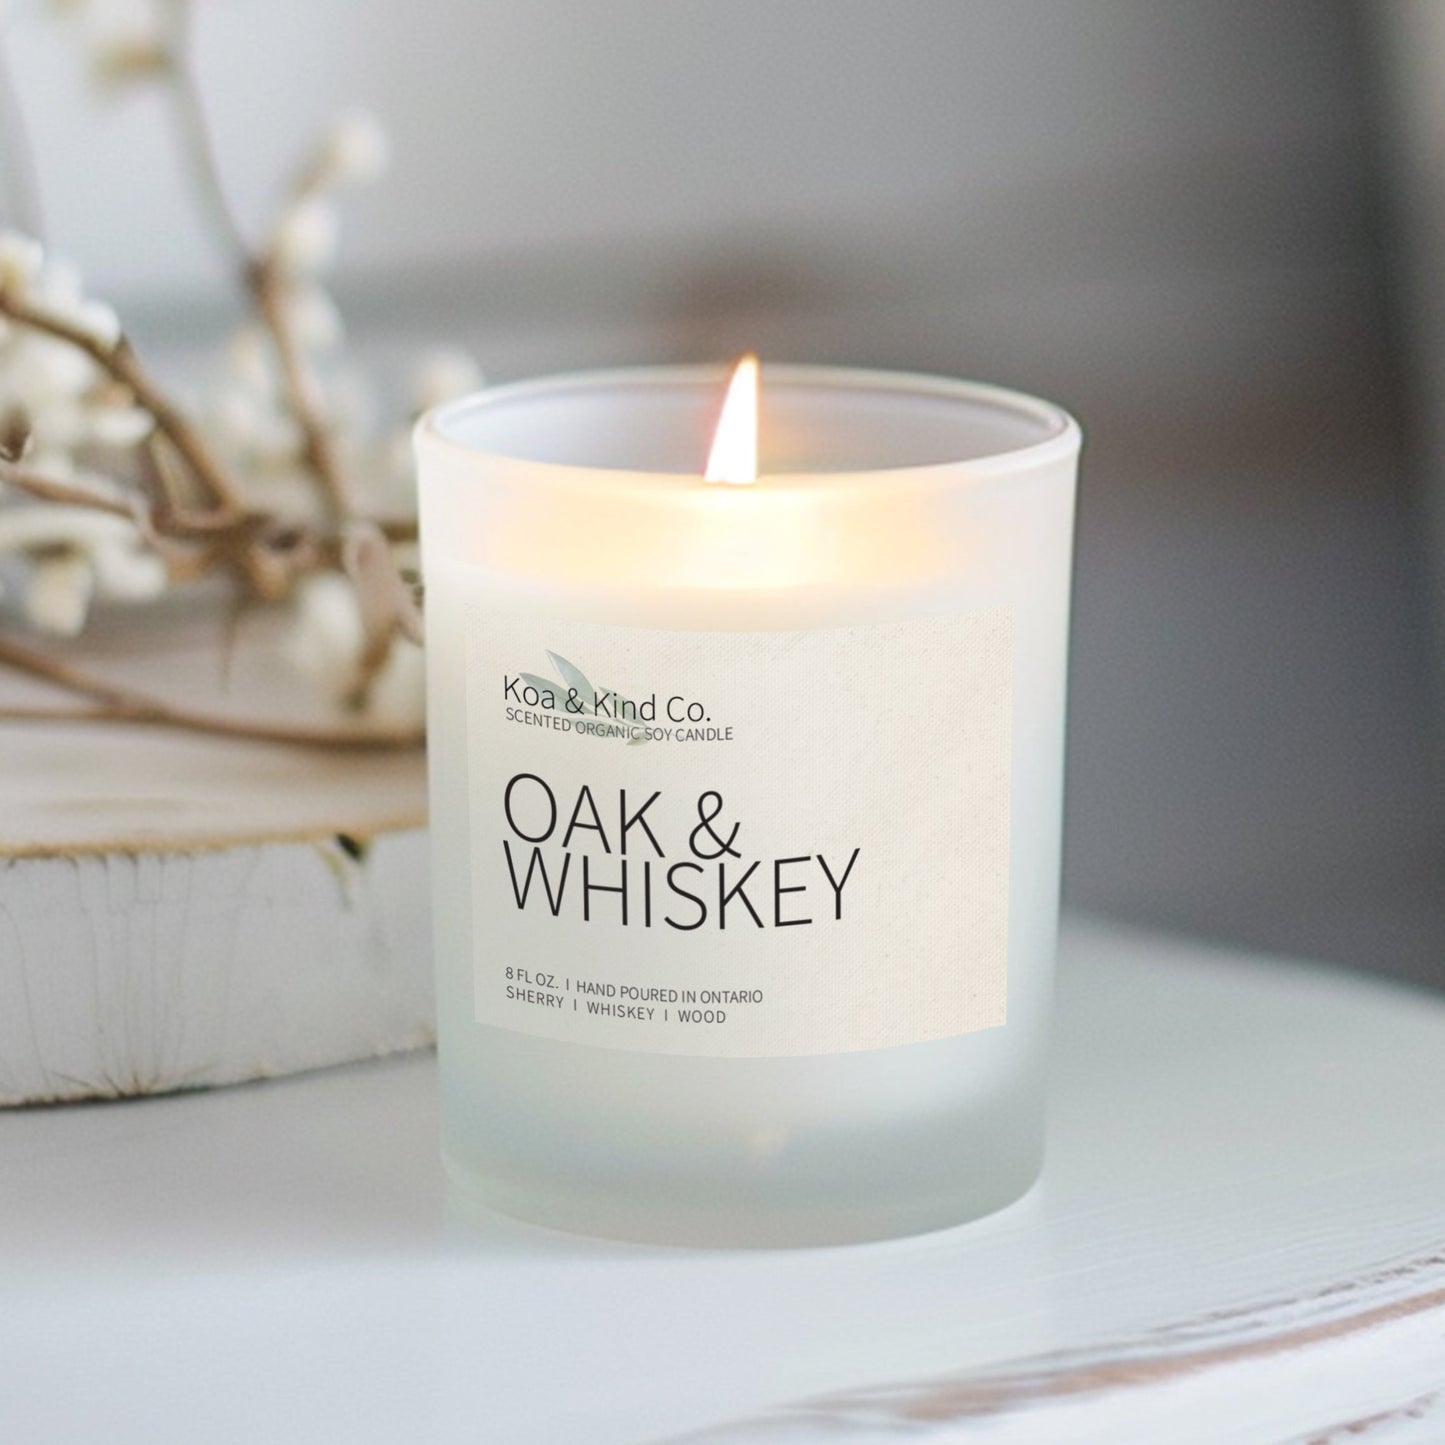 Oak & Whiskey Scented Soy Candle